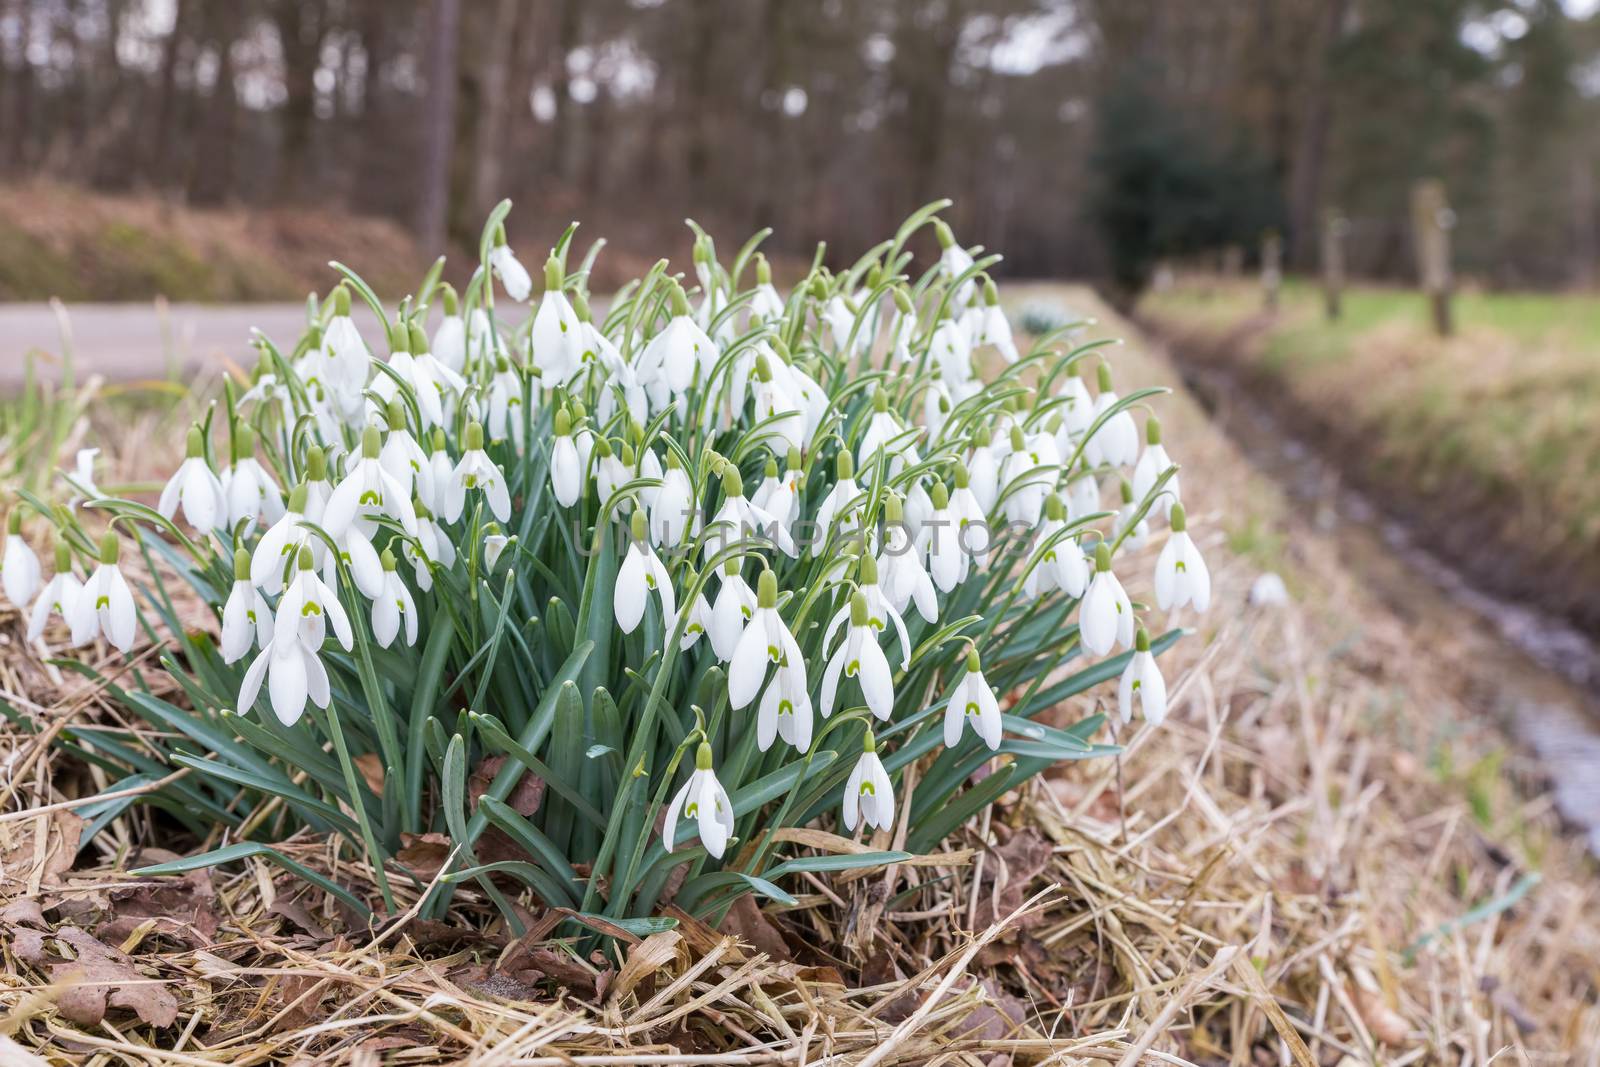 Group snowdrops near ditch in rural nature landscape during spring season